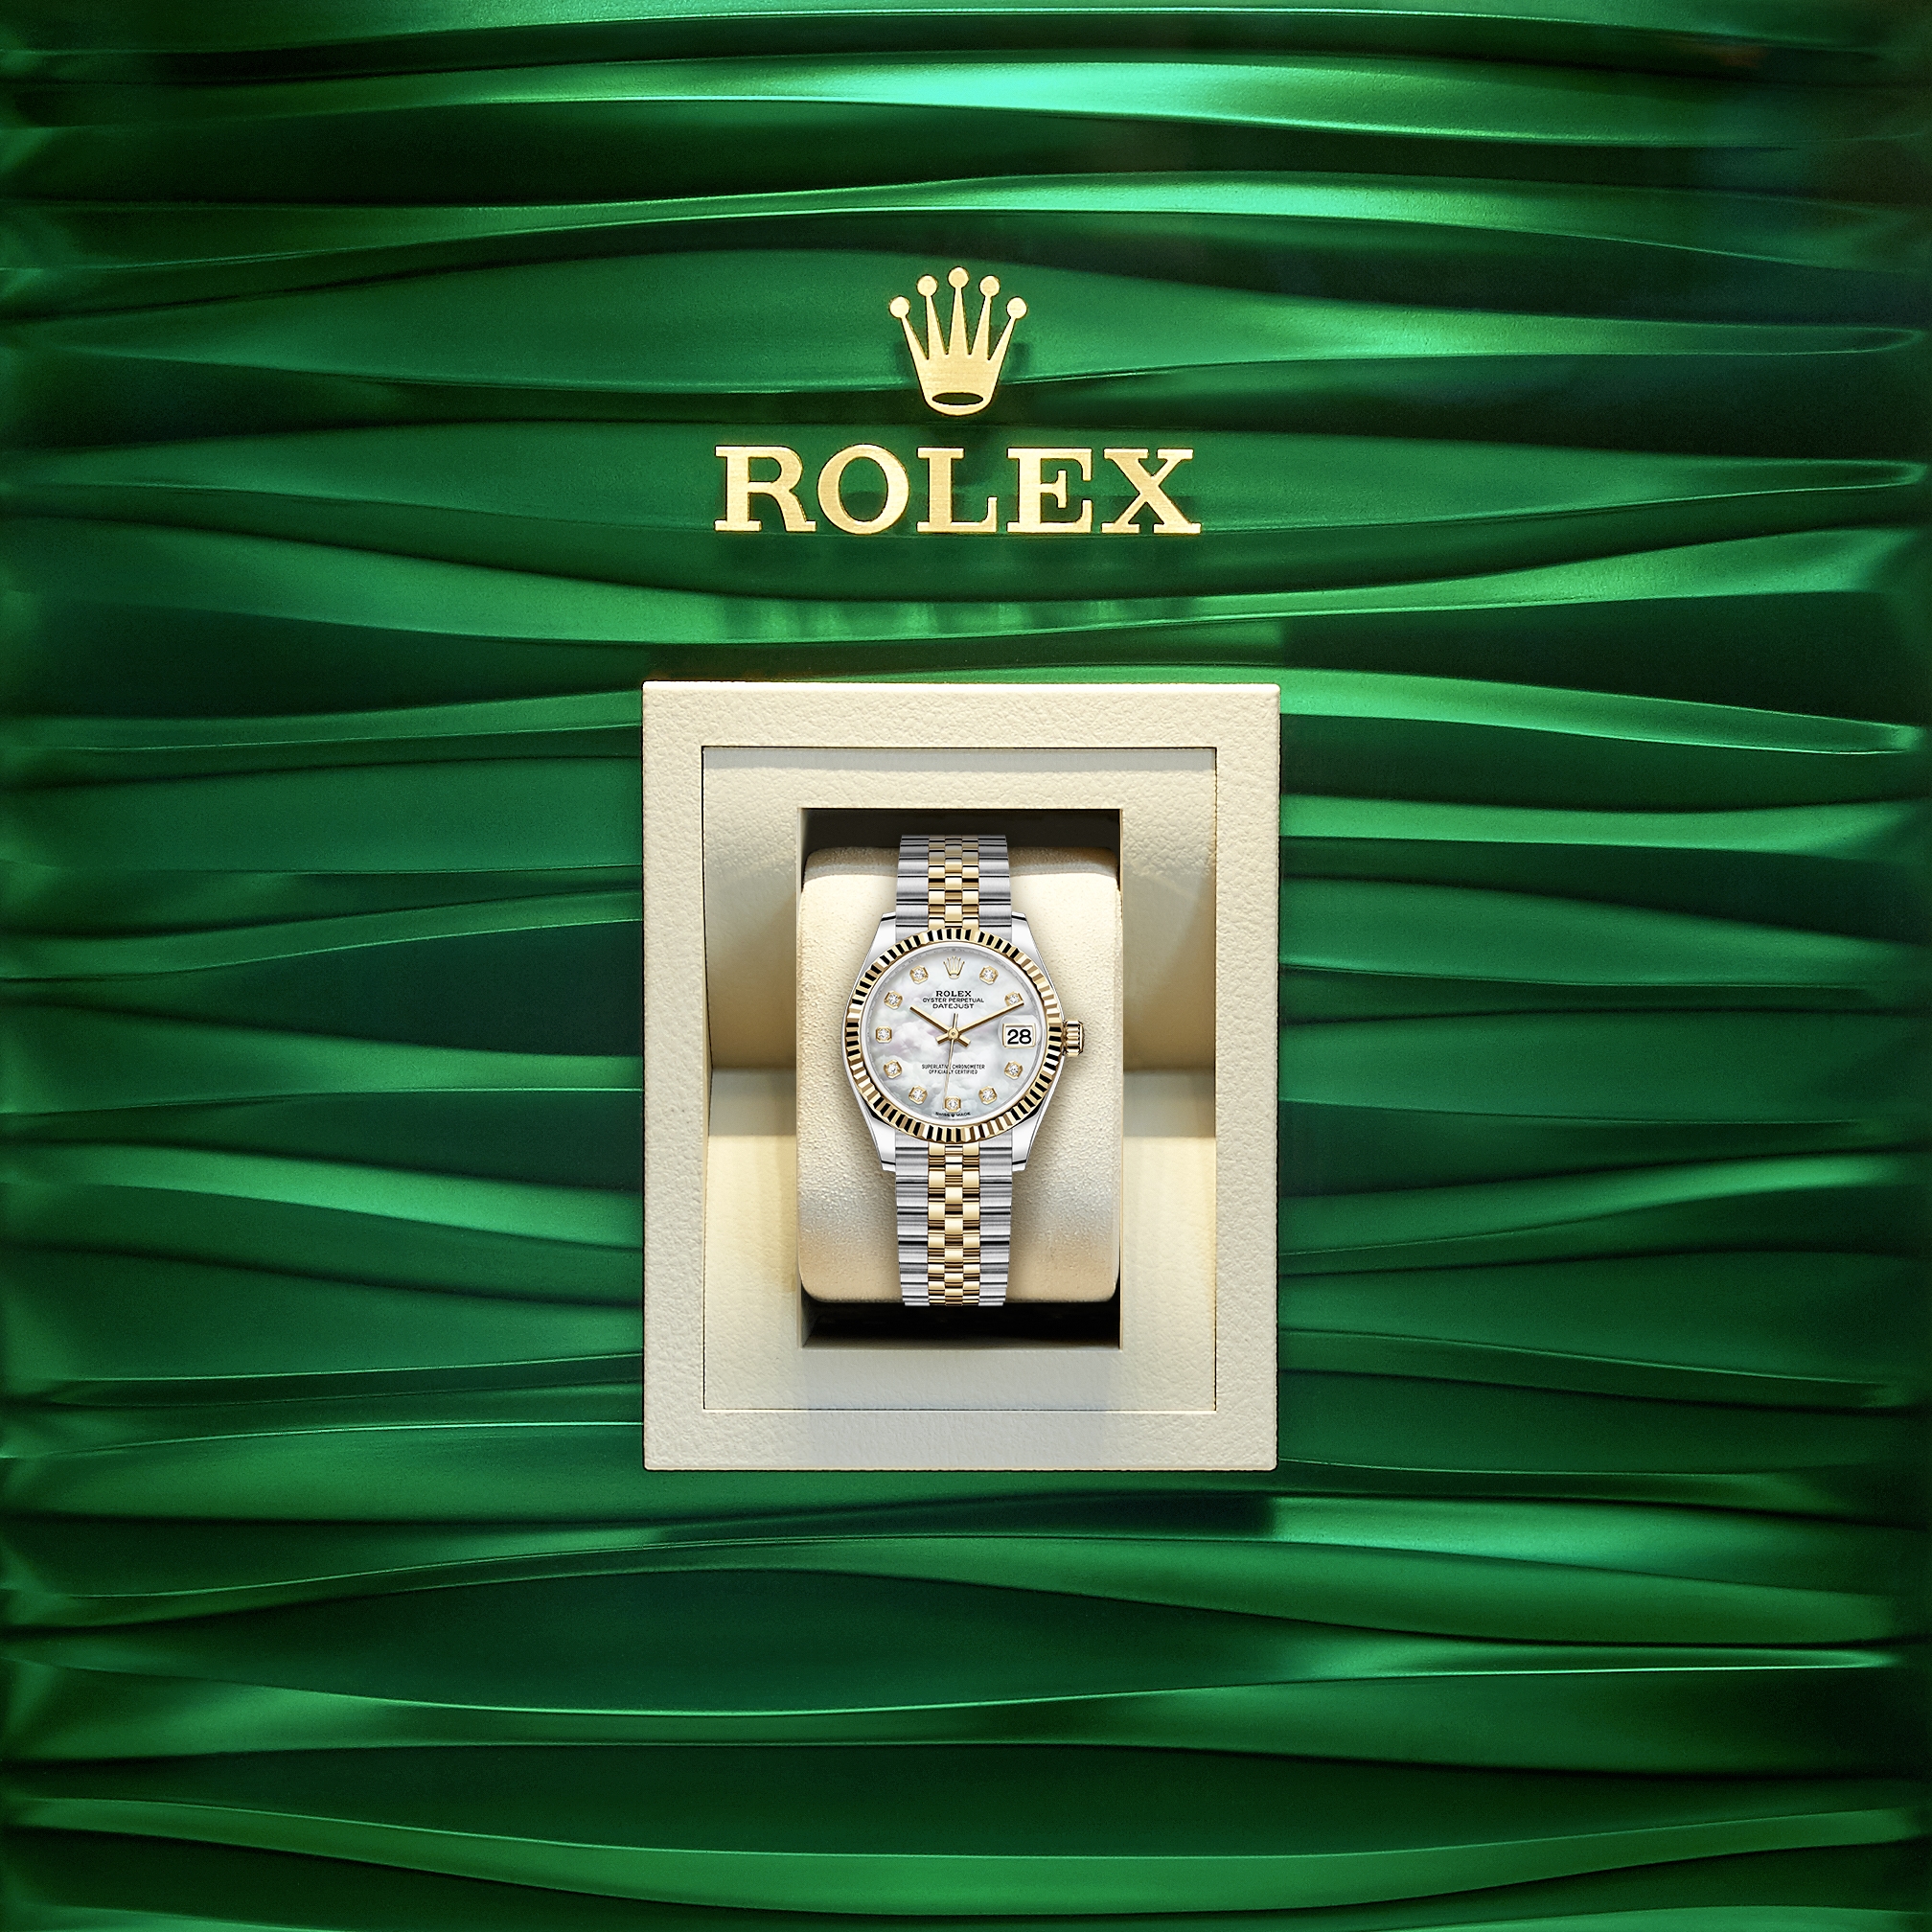 Rolex Datejust 31mm - Steel and Gold Yellow Gold - Domed Bezel - Oyster 178243 CHIORolex Datejust 31mm - Steel and Gold Yellow Gold - Domed Bezel - Oyster 178243 CHRO